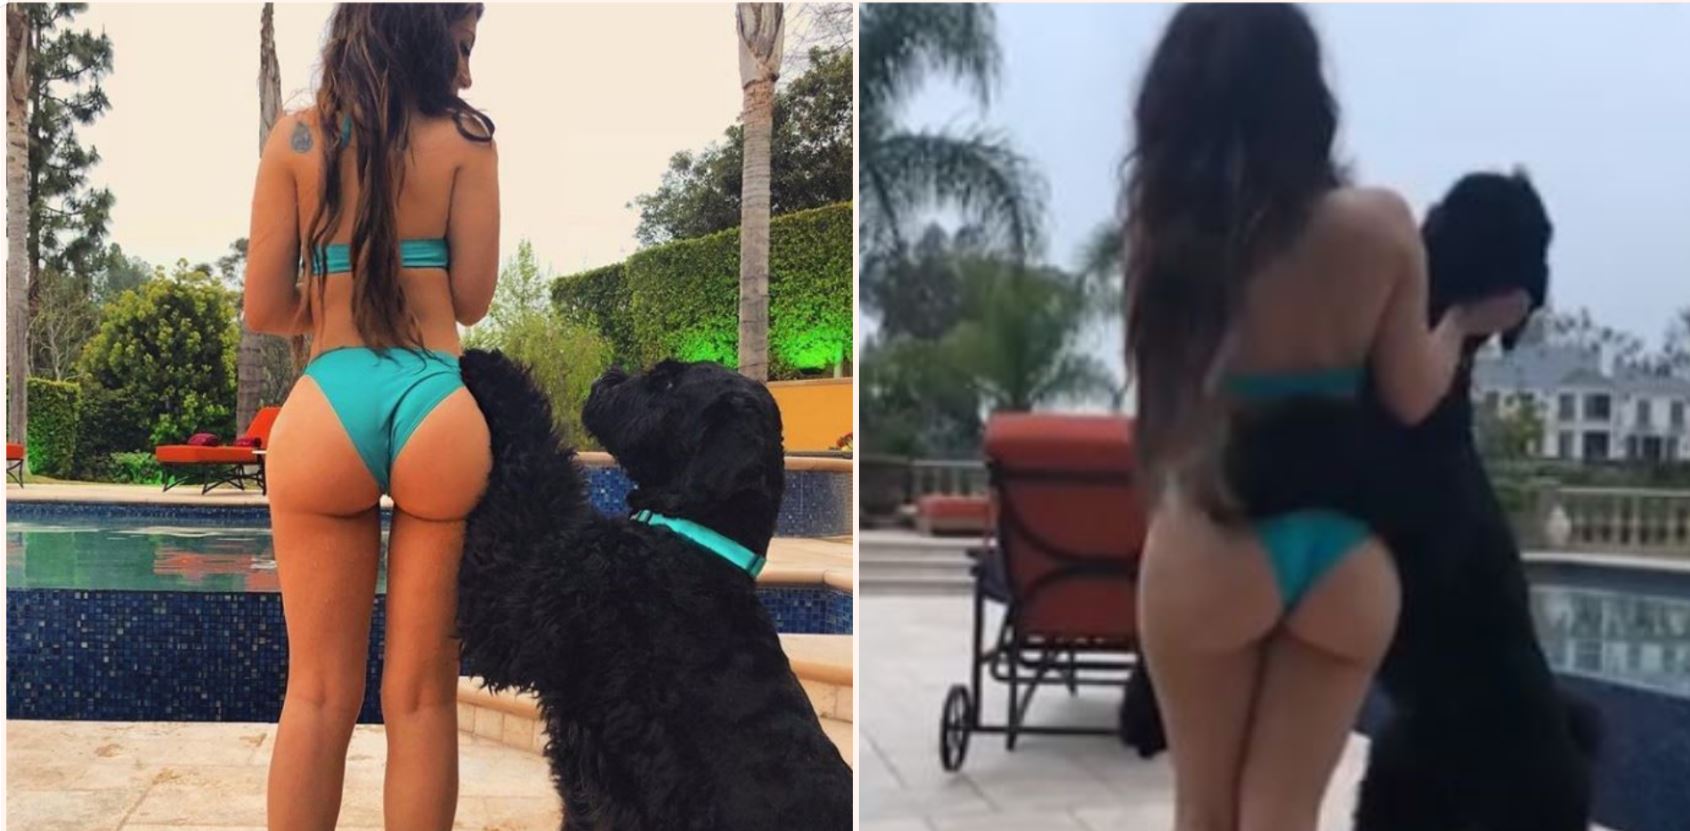 Model being sued for sexually arousing dog after being asked to pose with it